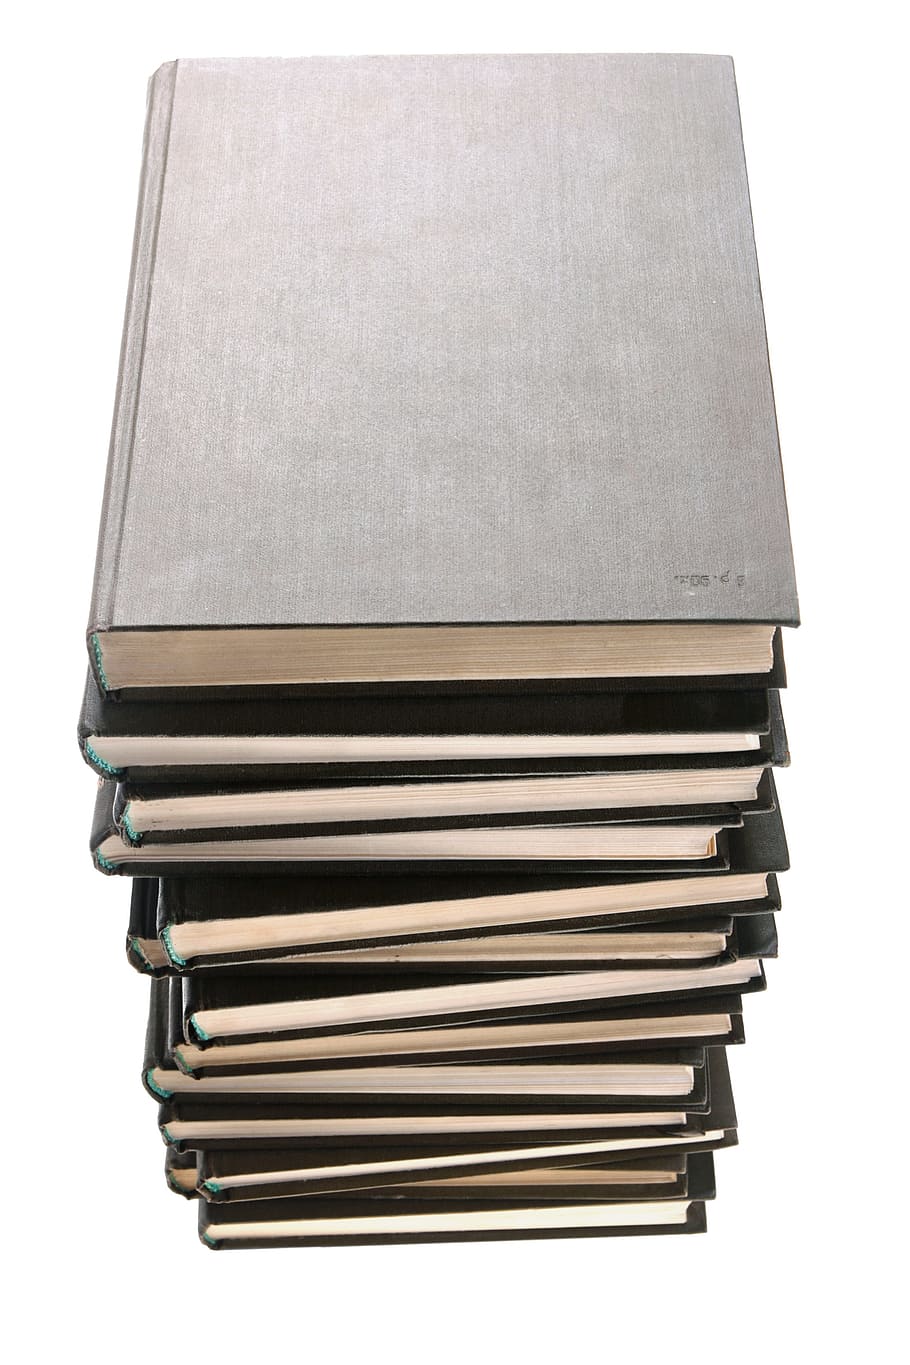 book, books, education, encyclopedia, heap, information, isolated, knowledge, literature, stack